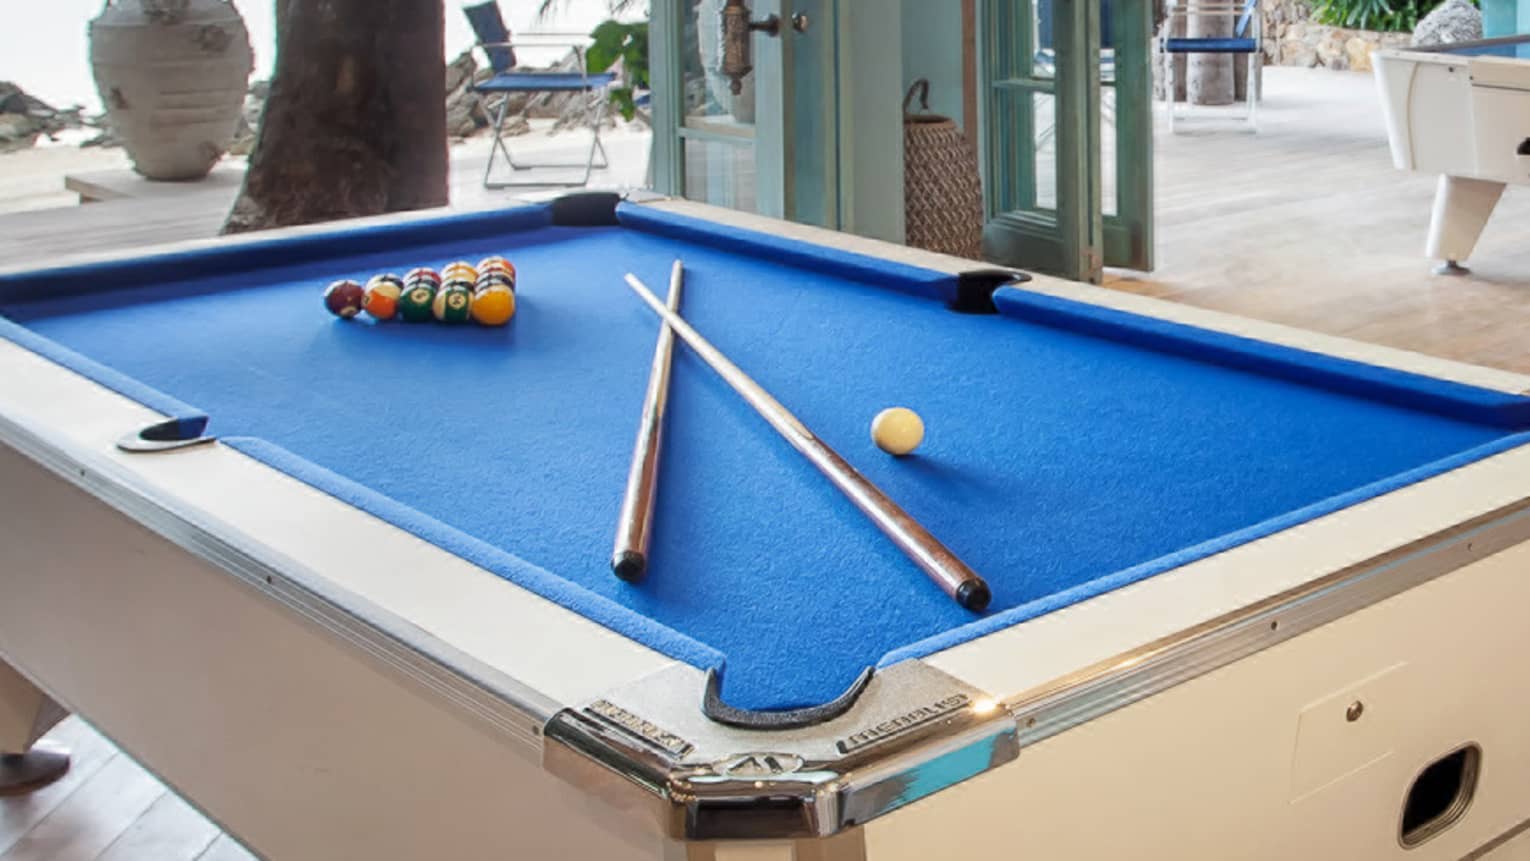 Blue billiards table with pool balls, sticks by seating area, open wall to patio